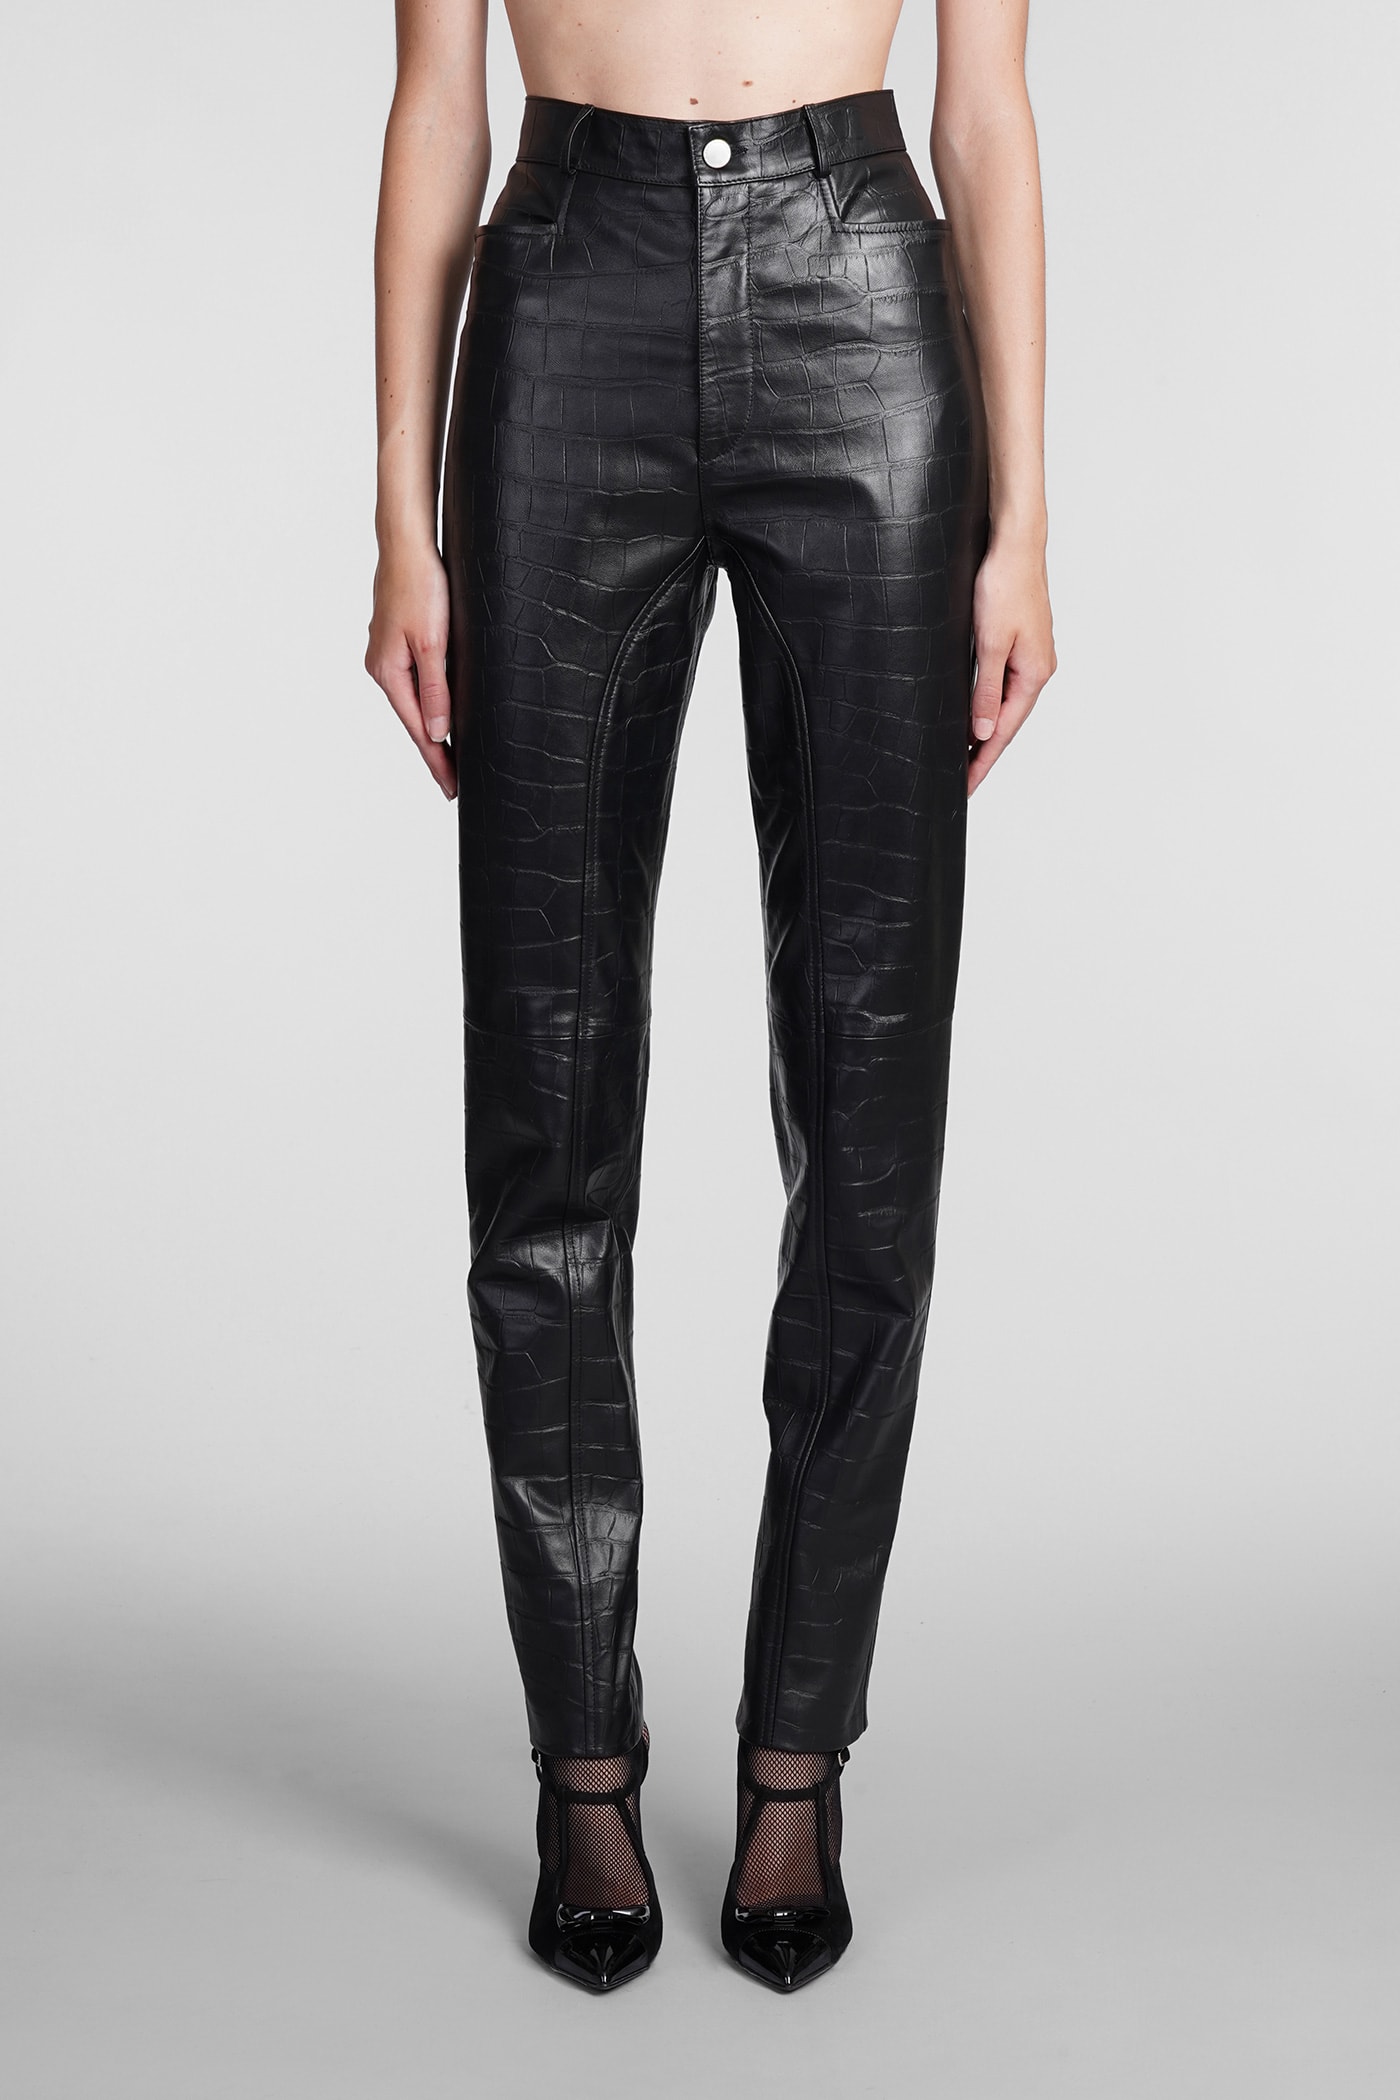 Alessandra Rich Pants In Black Leather